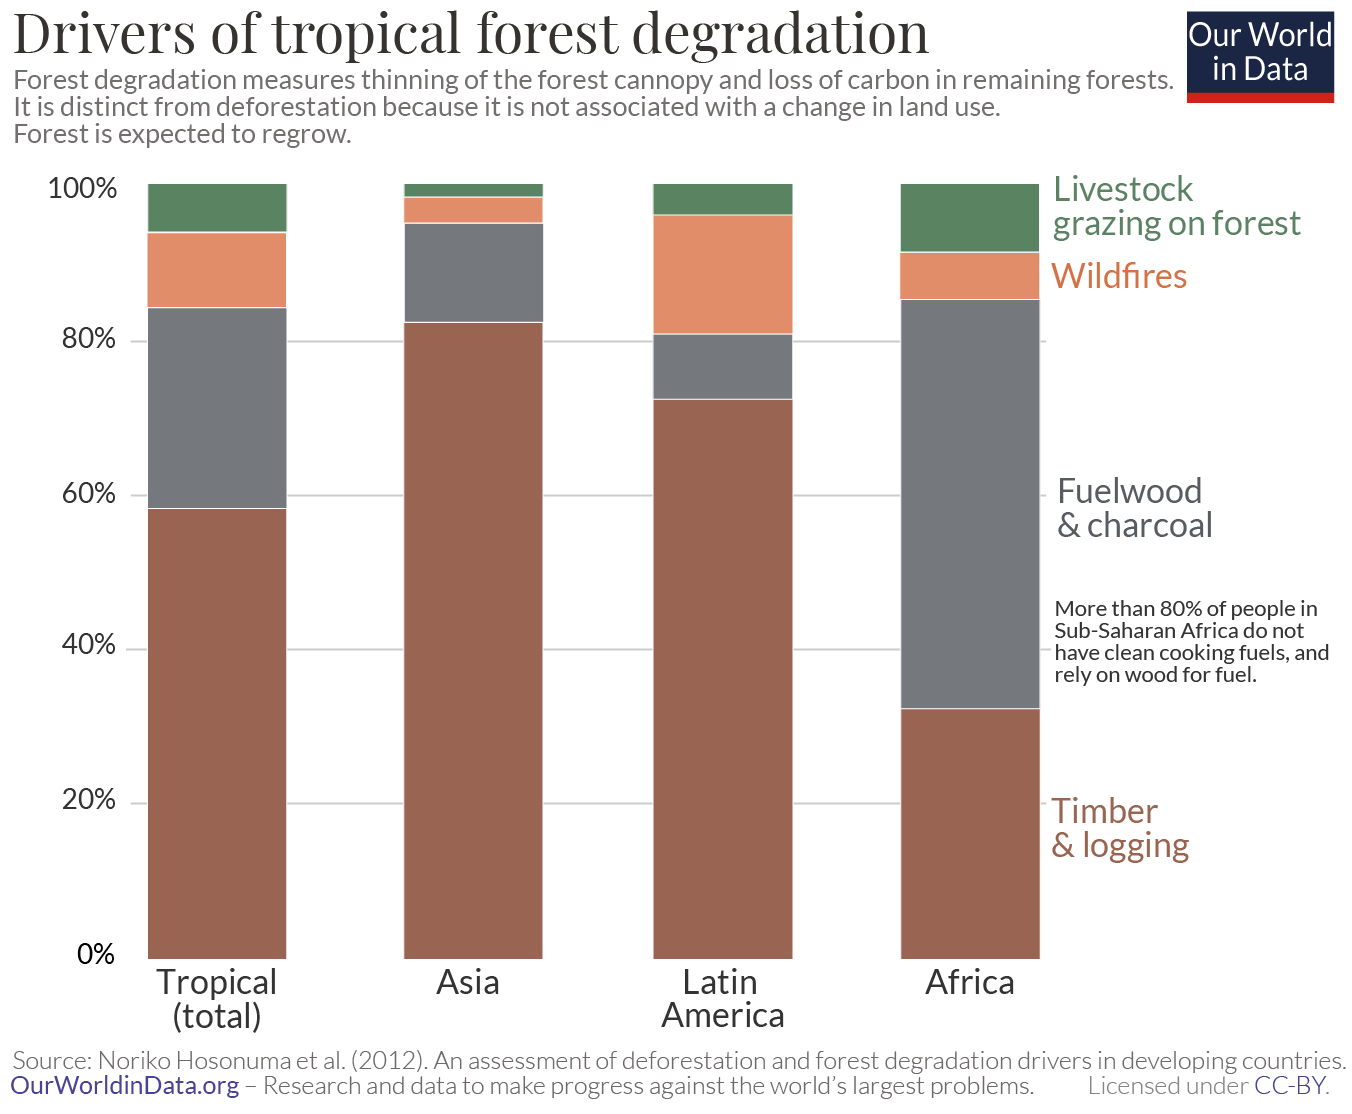 Drivers of forest degradation